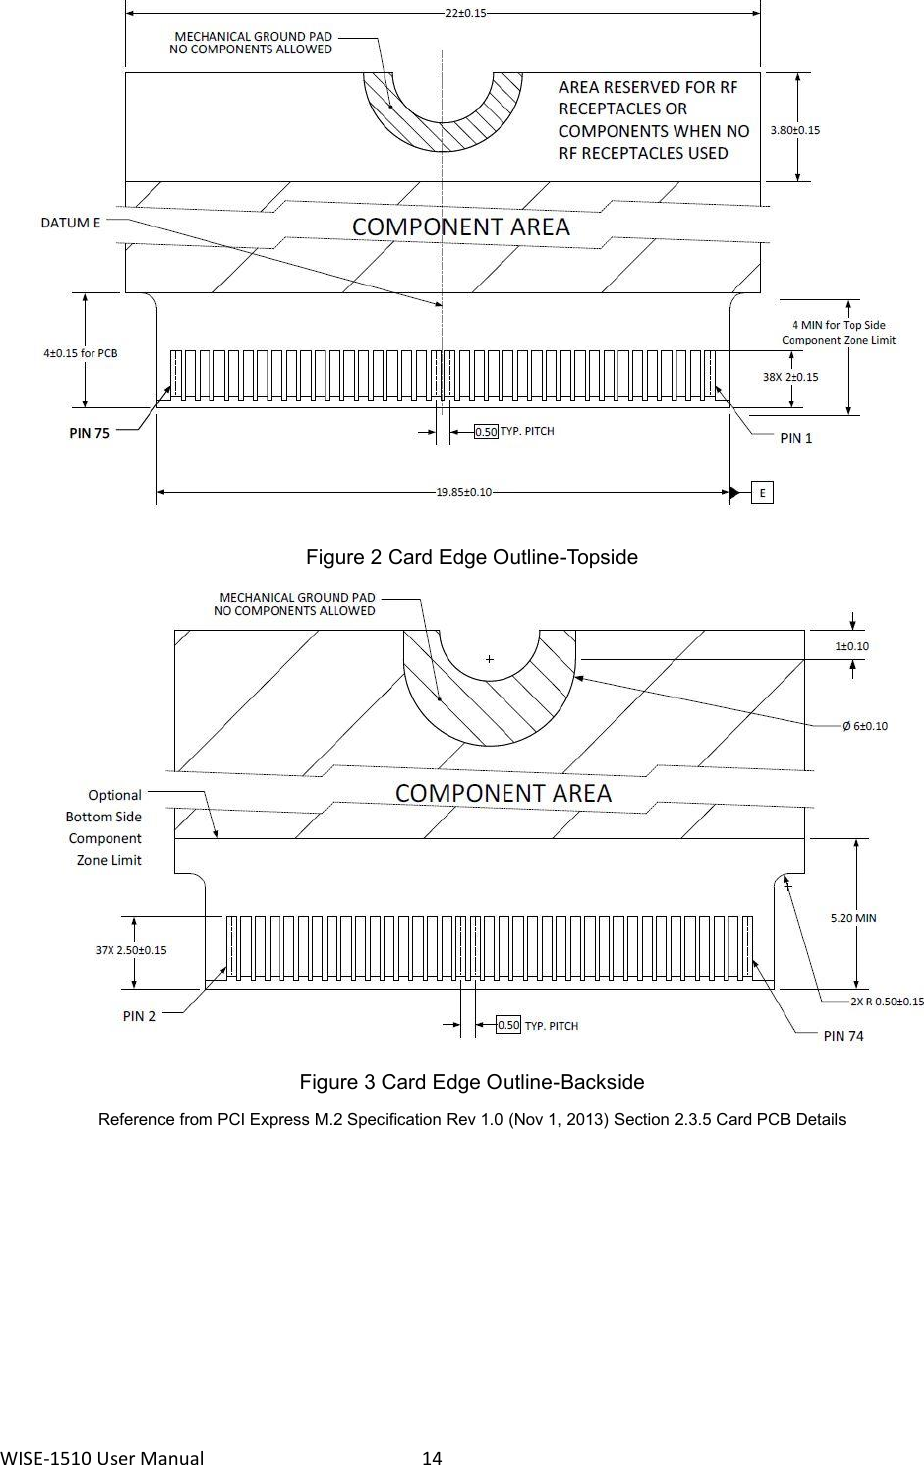 WISE-1510 User Manual  14         Figure 2 Card Edge Outline-Topside  Figure 3 Card Edge Outline-Backside Reference from PCI Express M.2 Specification Rev 1.0 (Nov 1, 2013) Section 2.3.5 Card PCB Details    